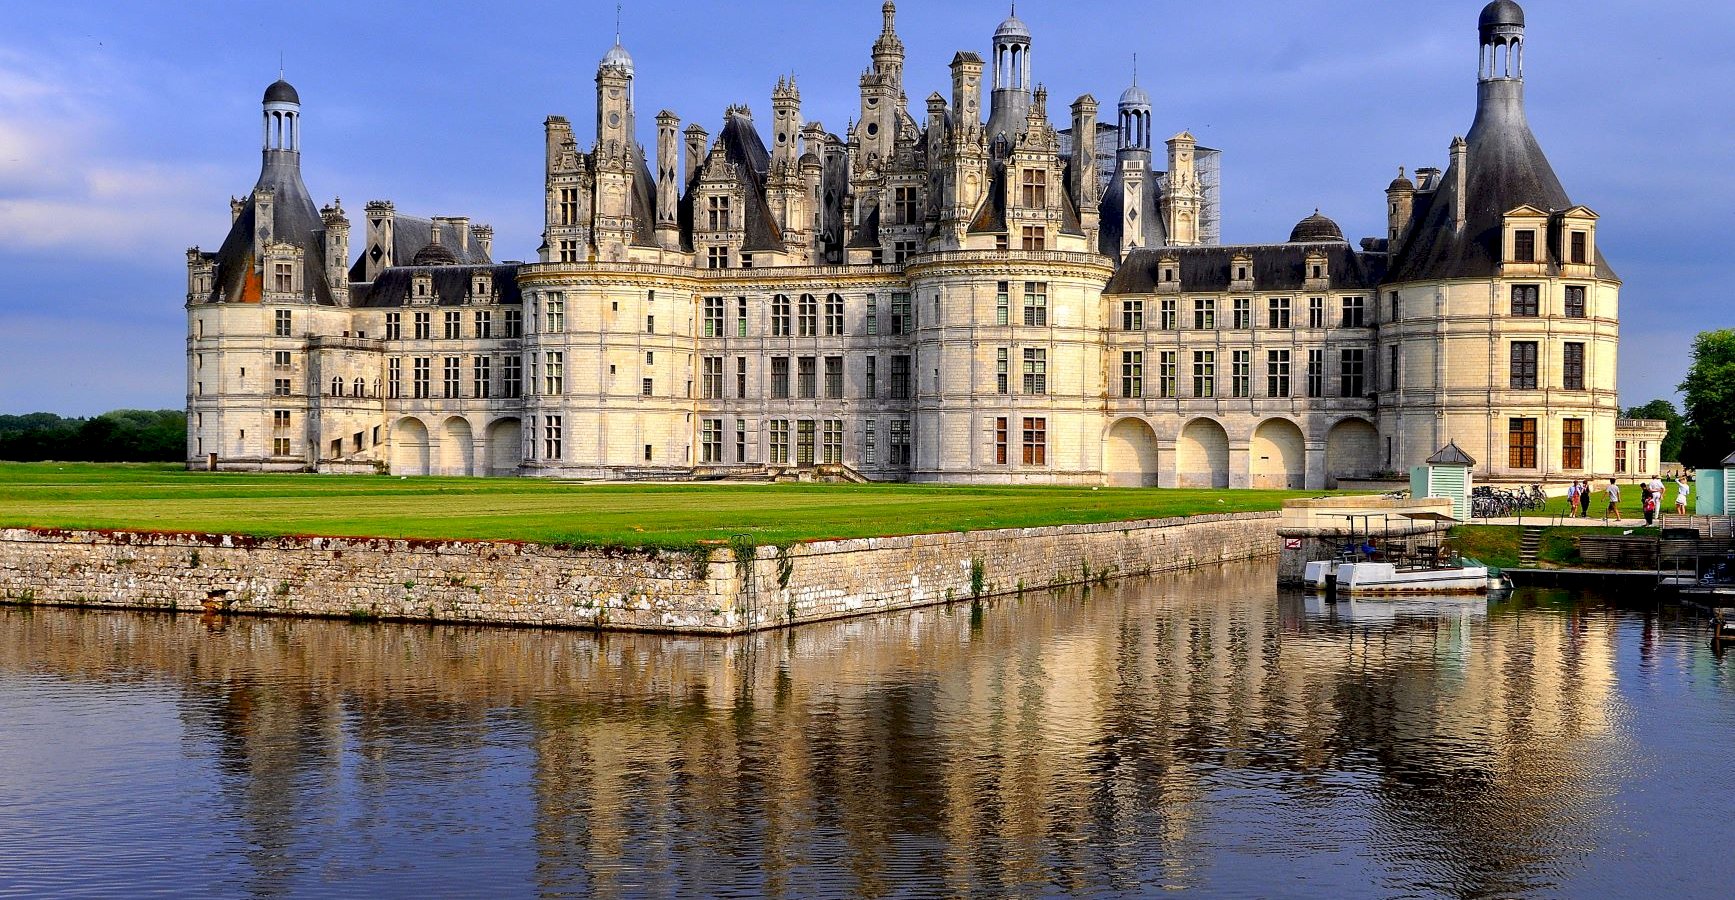 Ophorus Tours - A Private Day Trip from Tours to Chenonceau & Chambord Loire Valley Castles